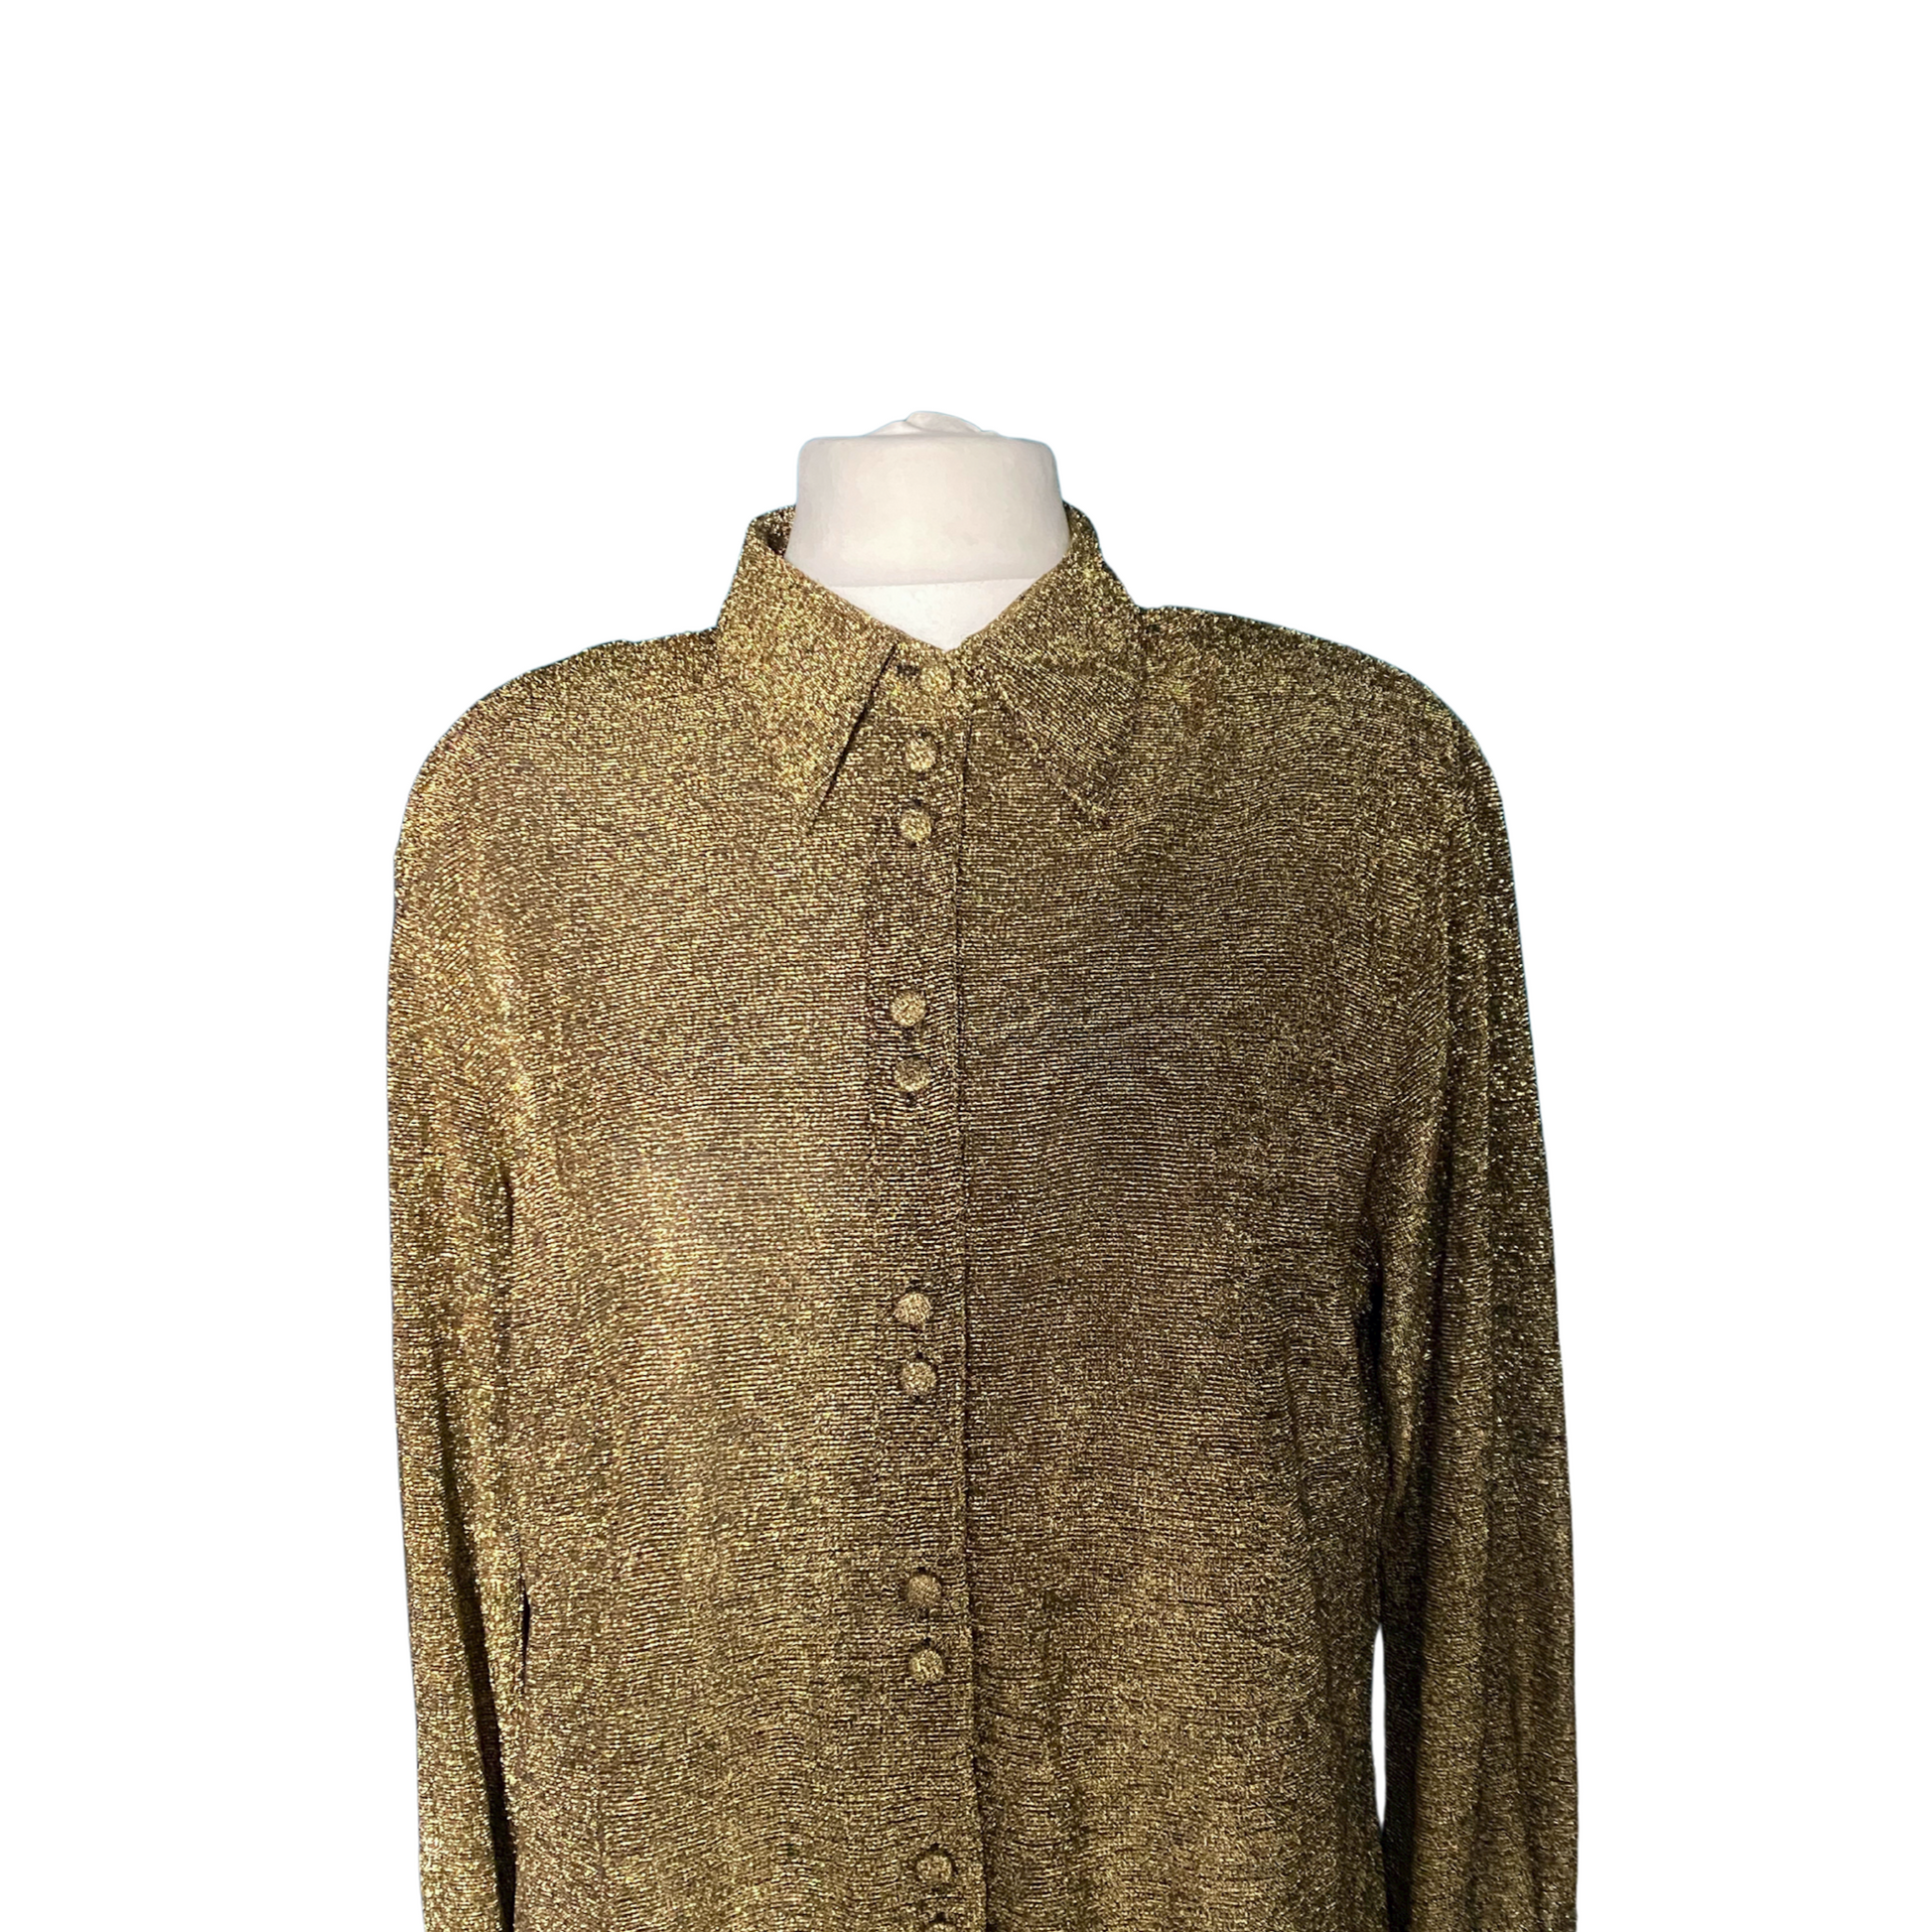 Shimmering gold blouse featuring fabric-covered buttons and a stylish dagger collar.